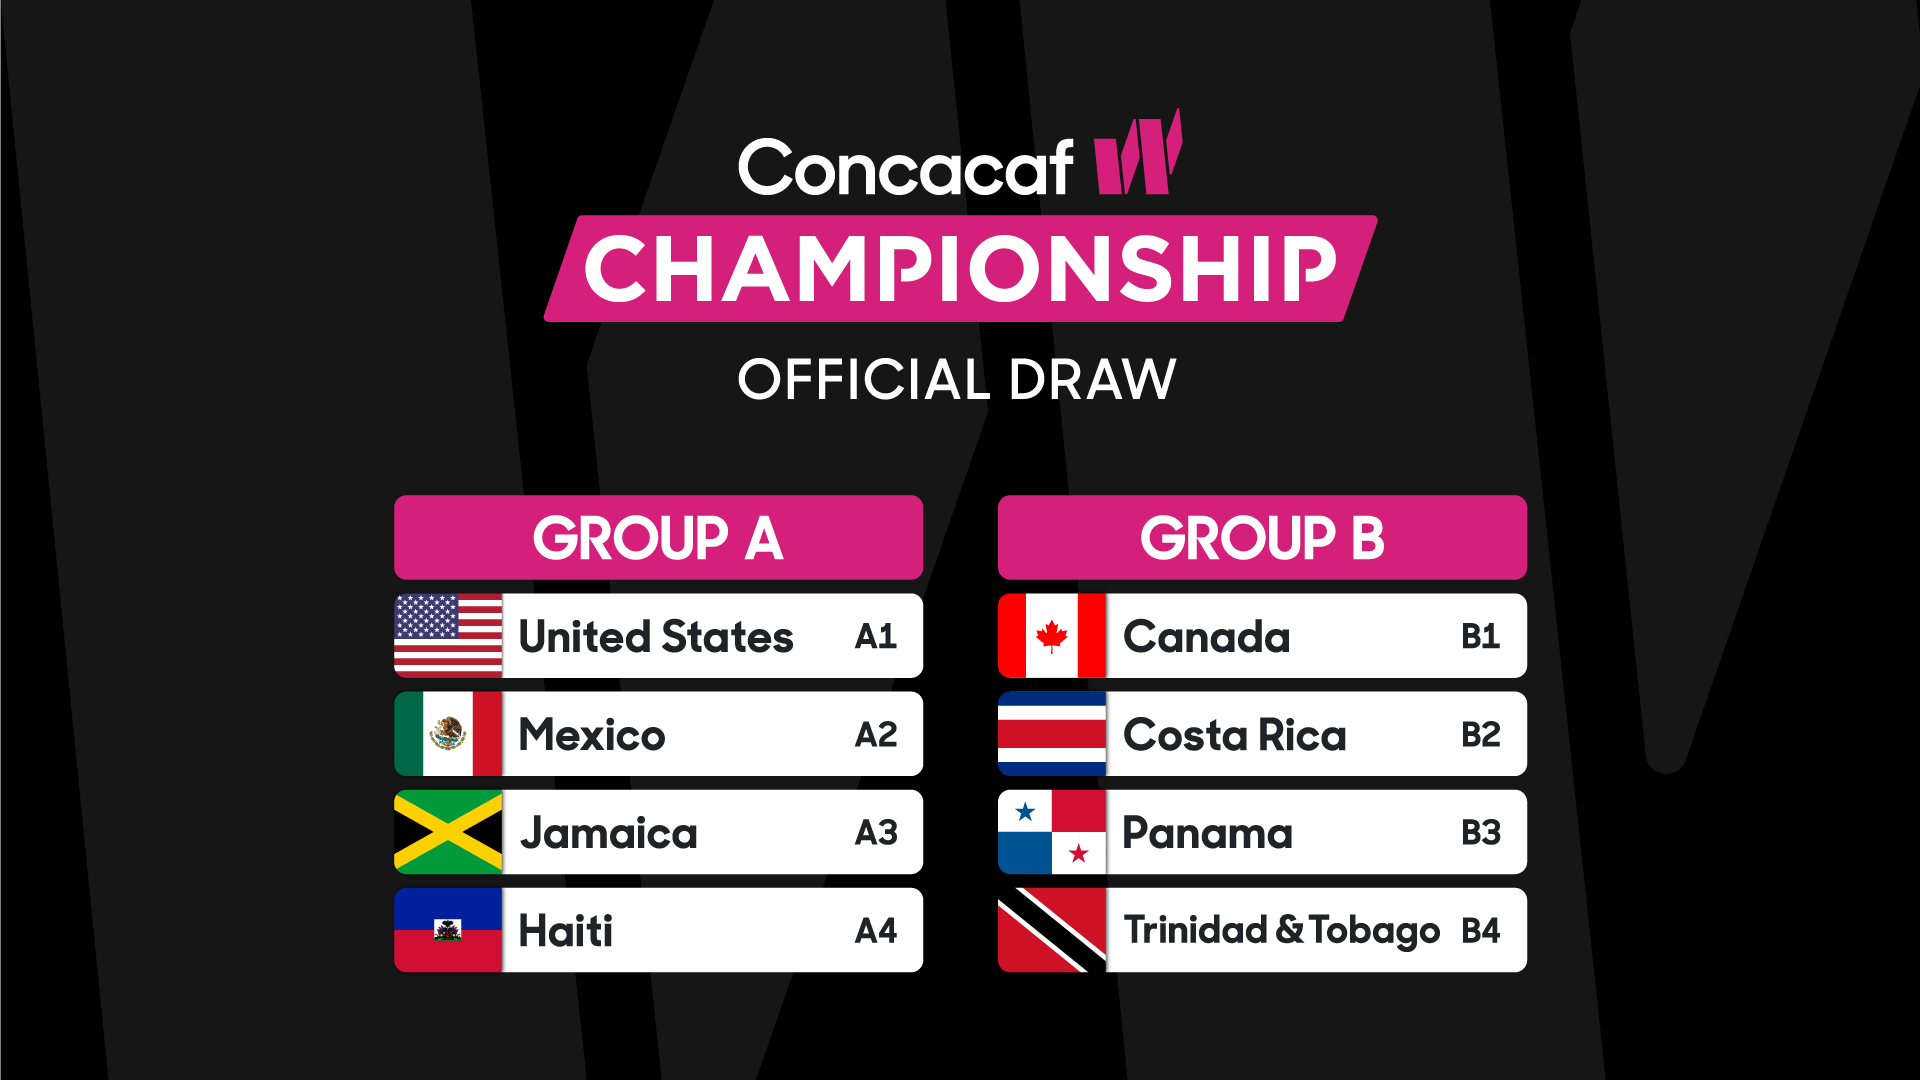 Concacaf W Championship Official Draw Results, Group A: USA, MEX, JAM, HAI; Group B CAN, CRC, PAN, TRI